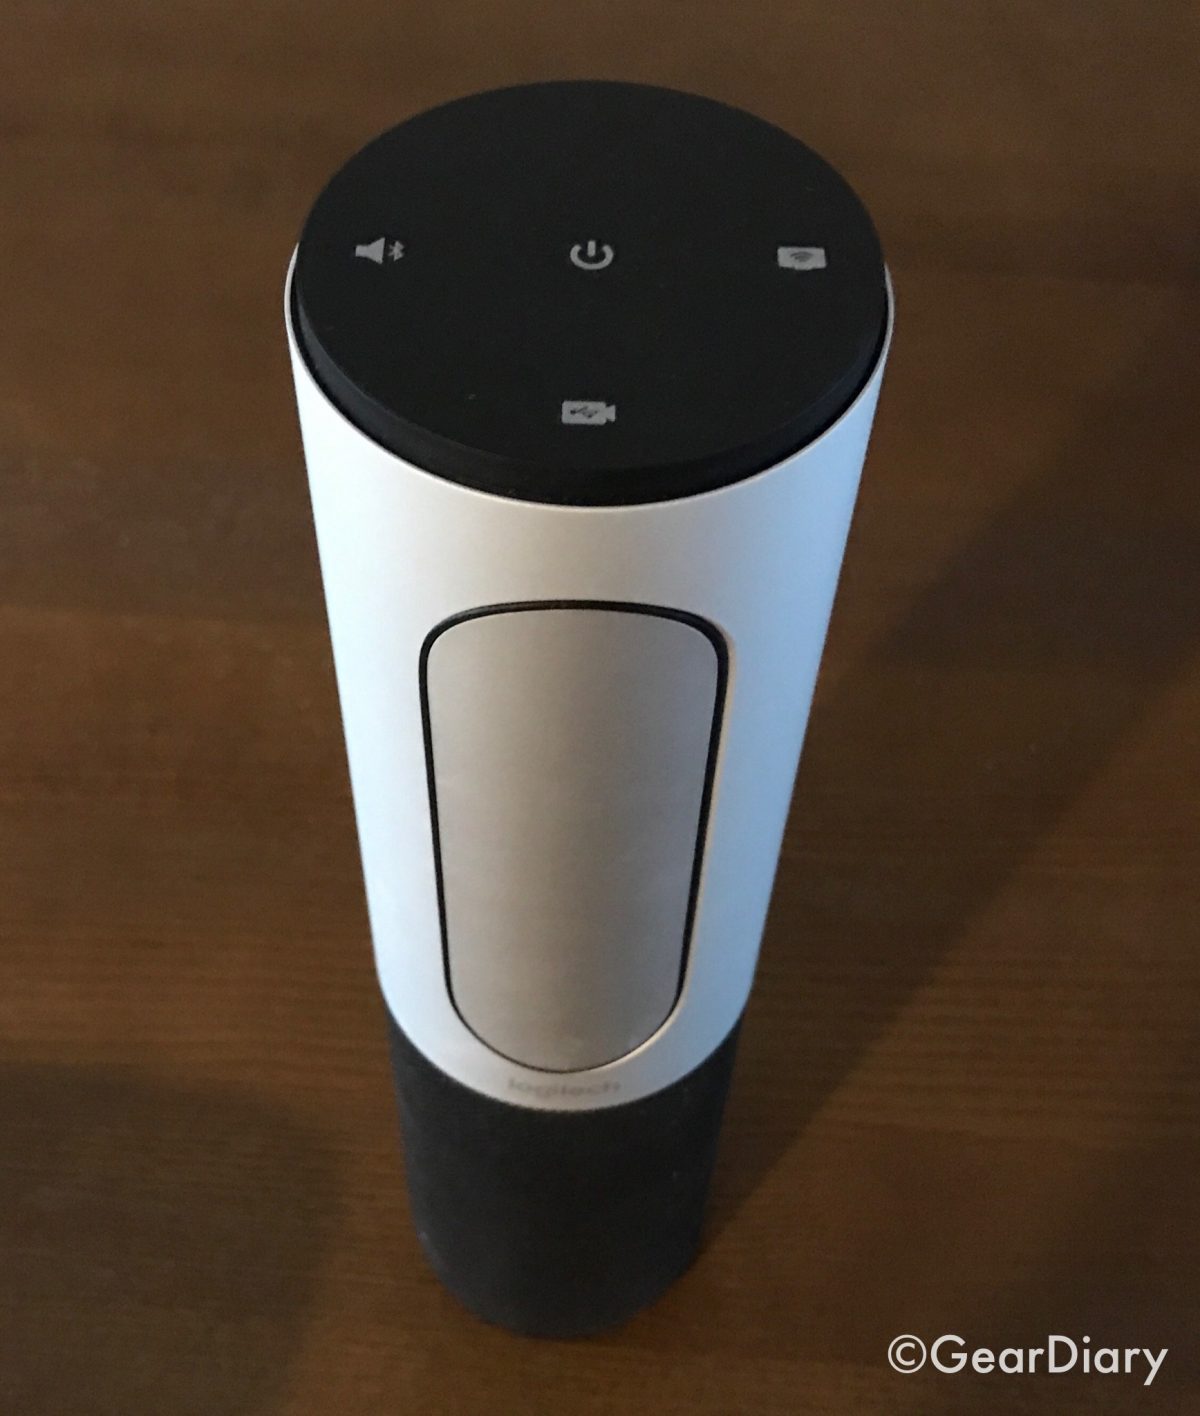 The Logitech ConferenceCam Connect Is a Small, Portable, & Powerful Conferencing Solution GearDiary